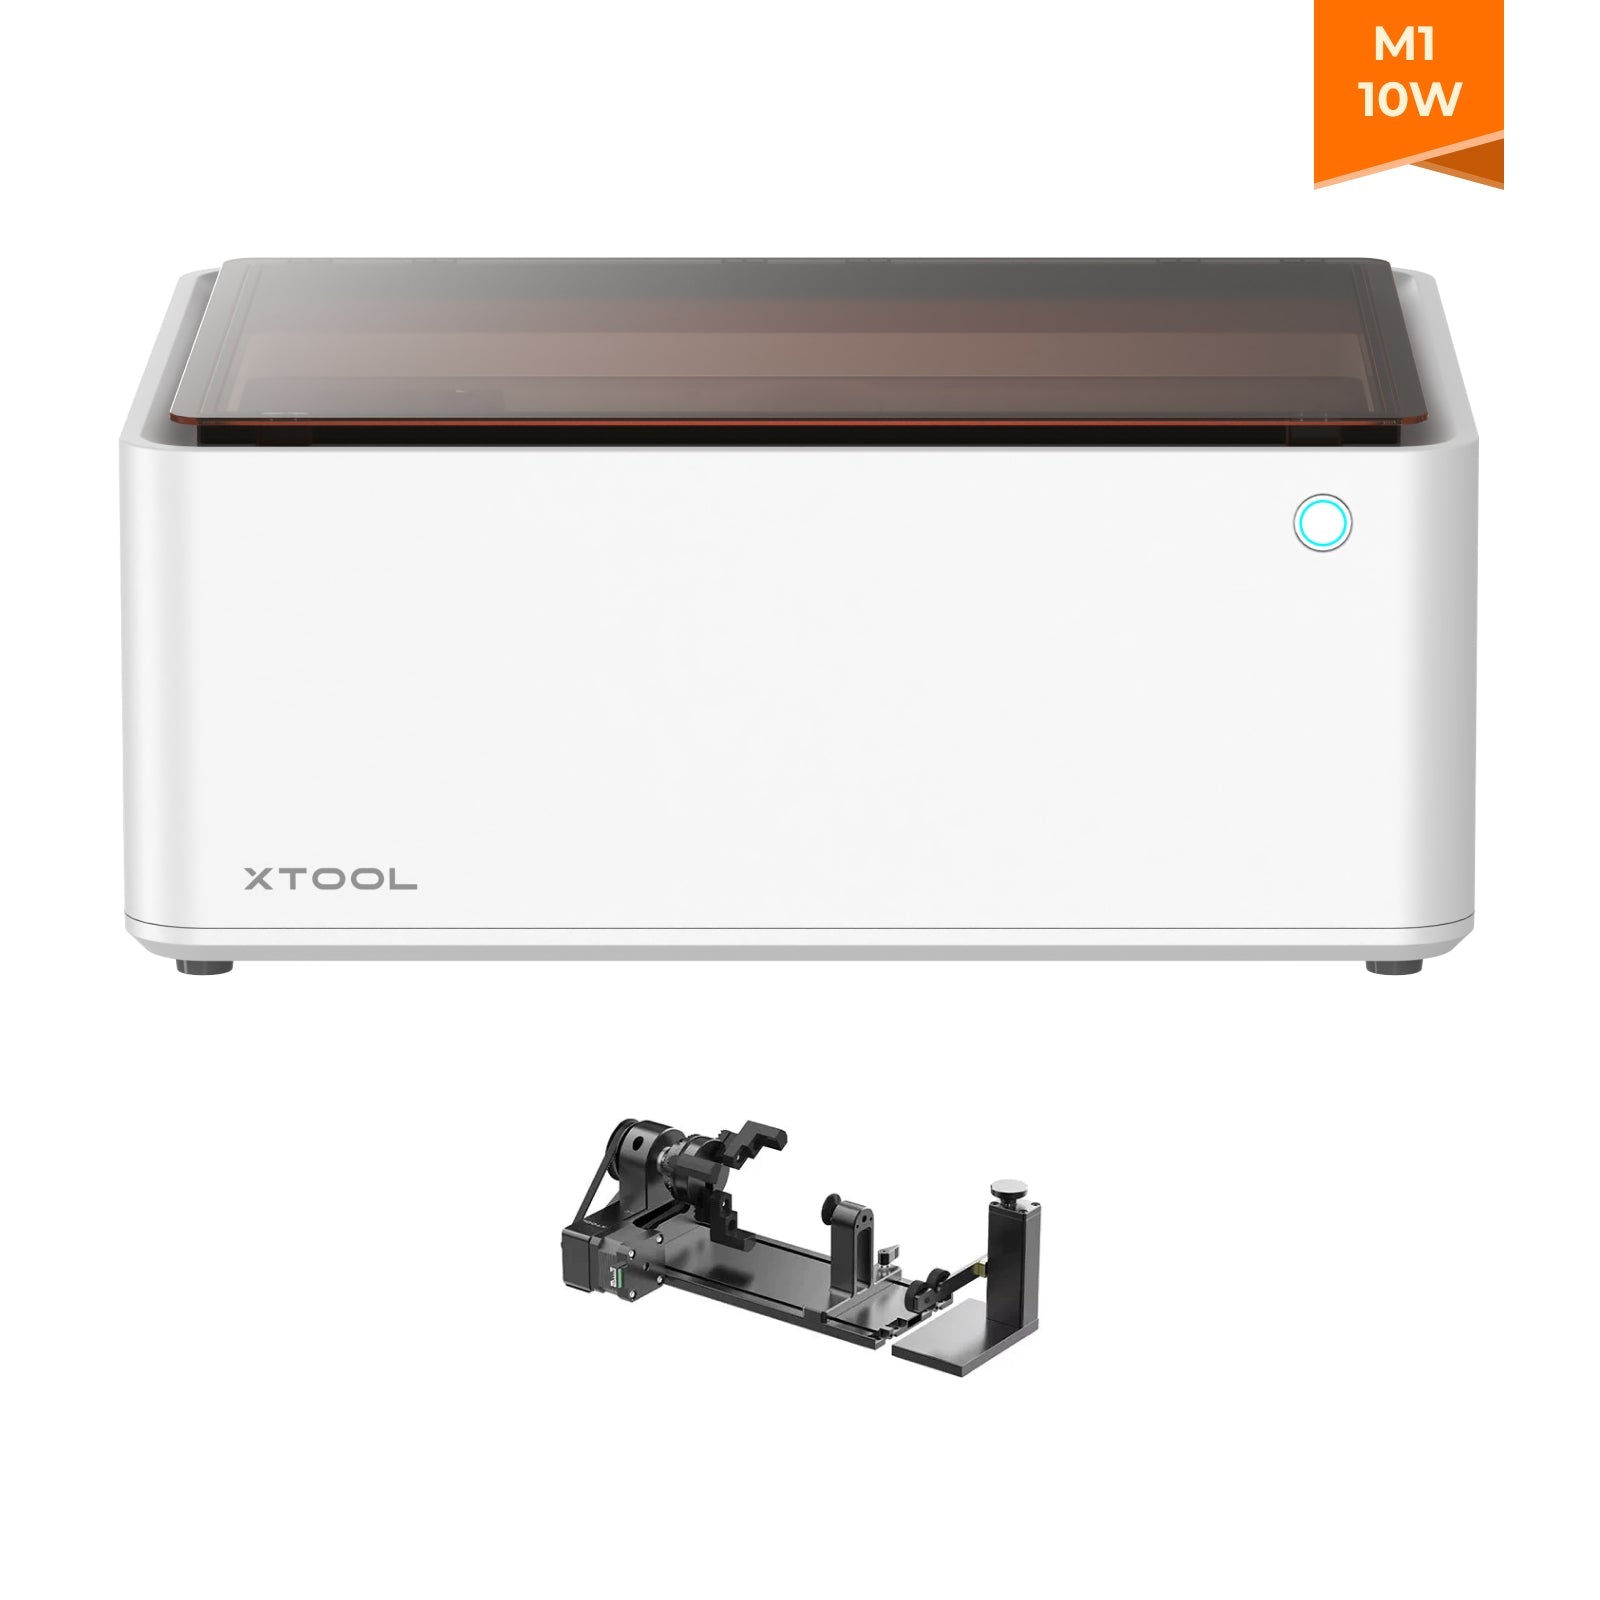 [Refurbished] xTool M1 10W Smart 2-in-1 Laser Engraver and Vinyl Cutter